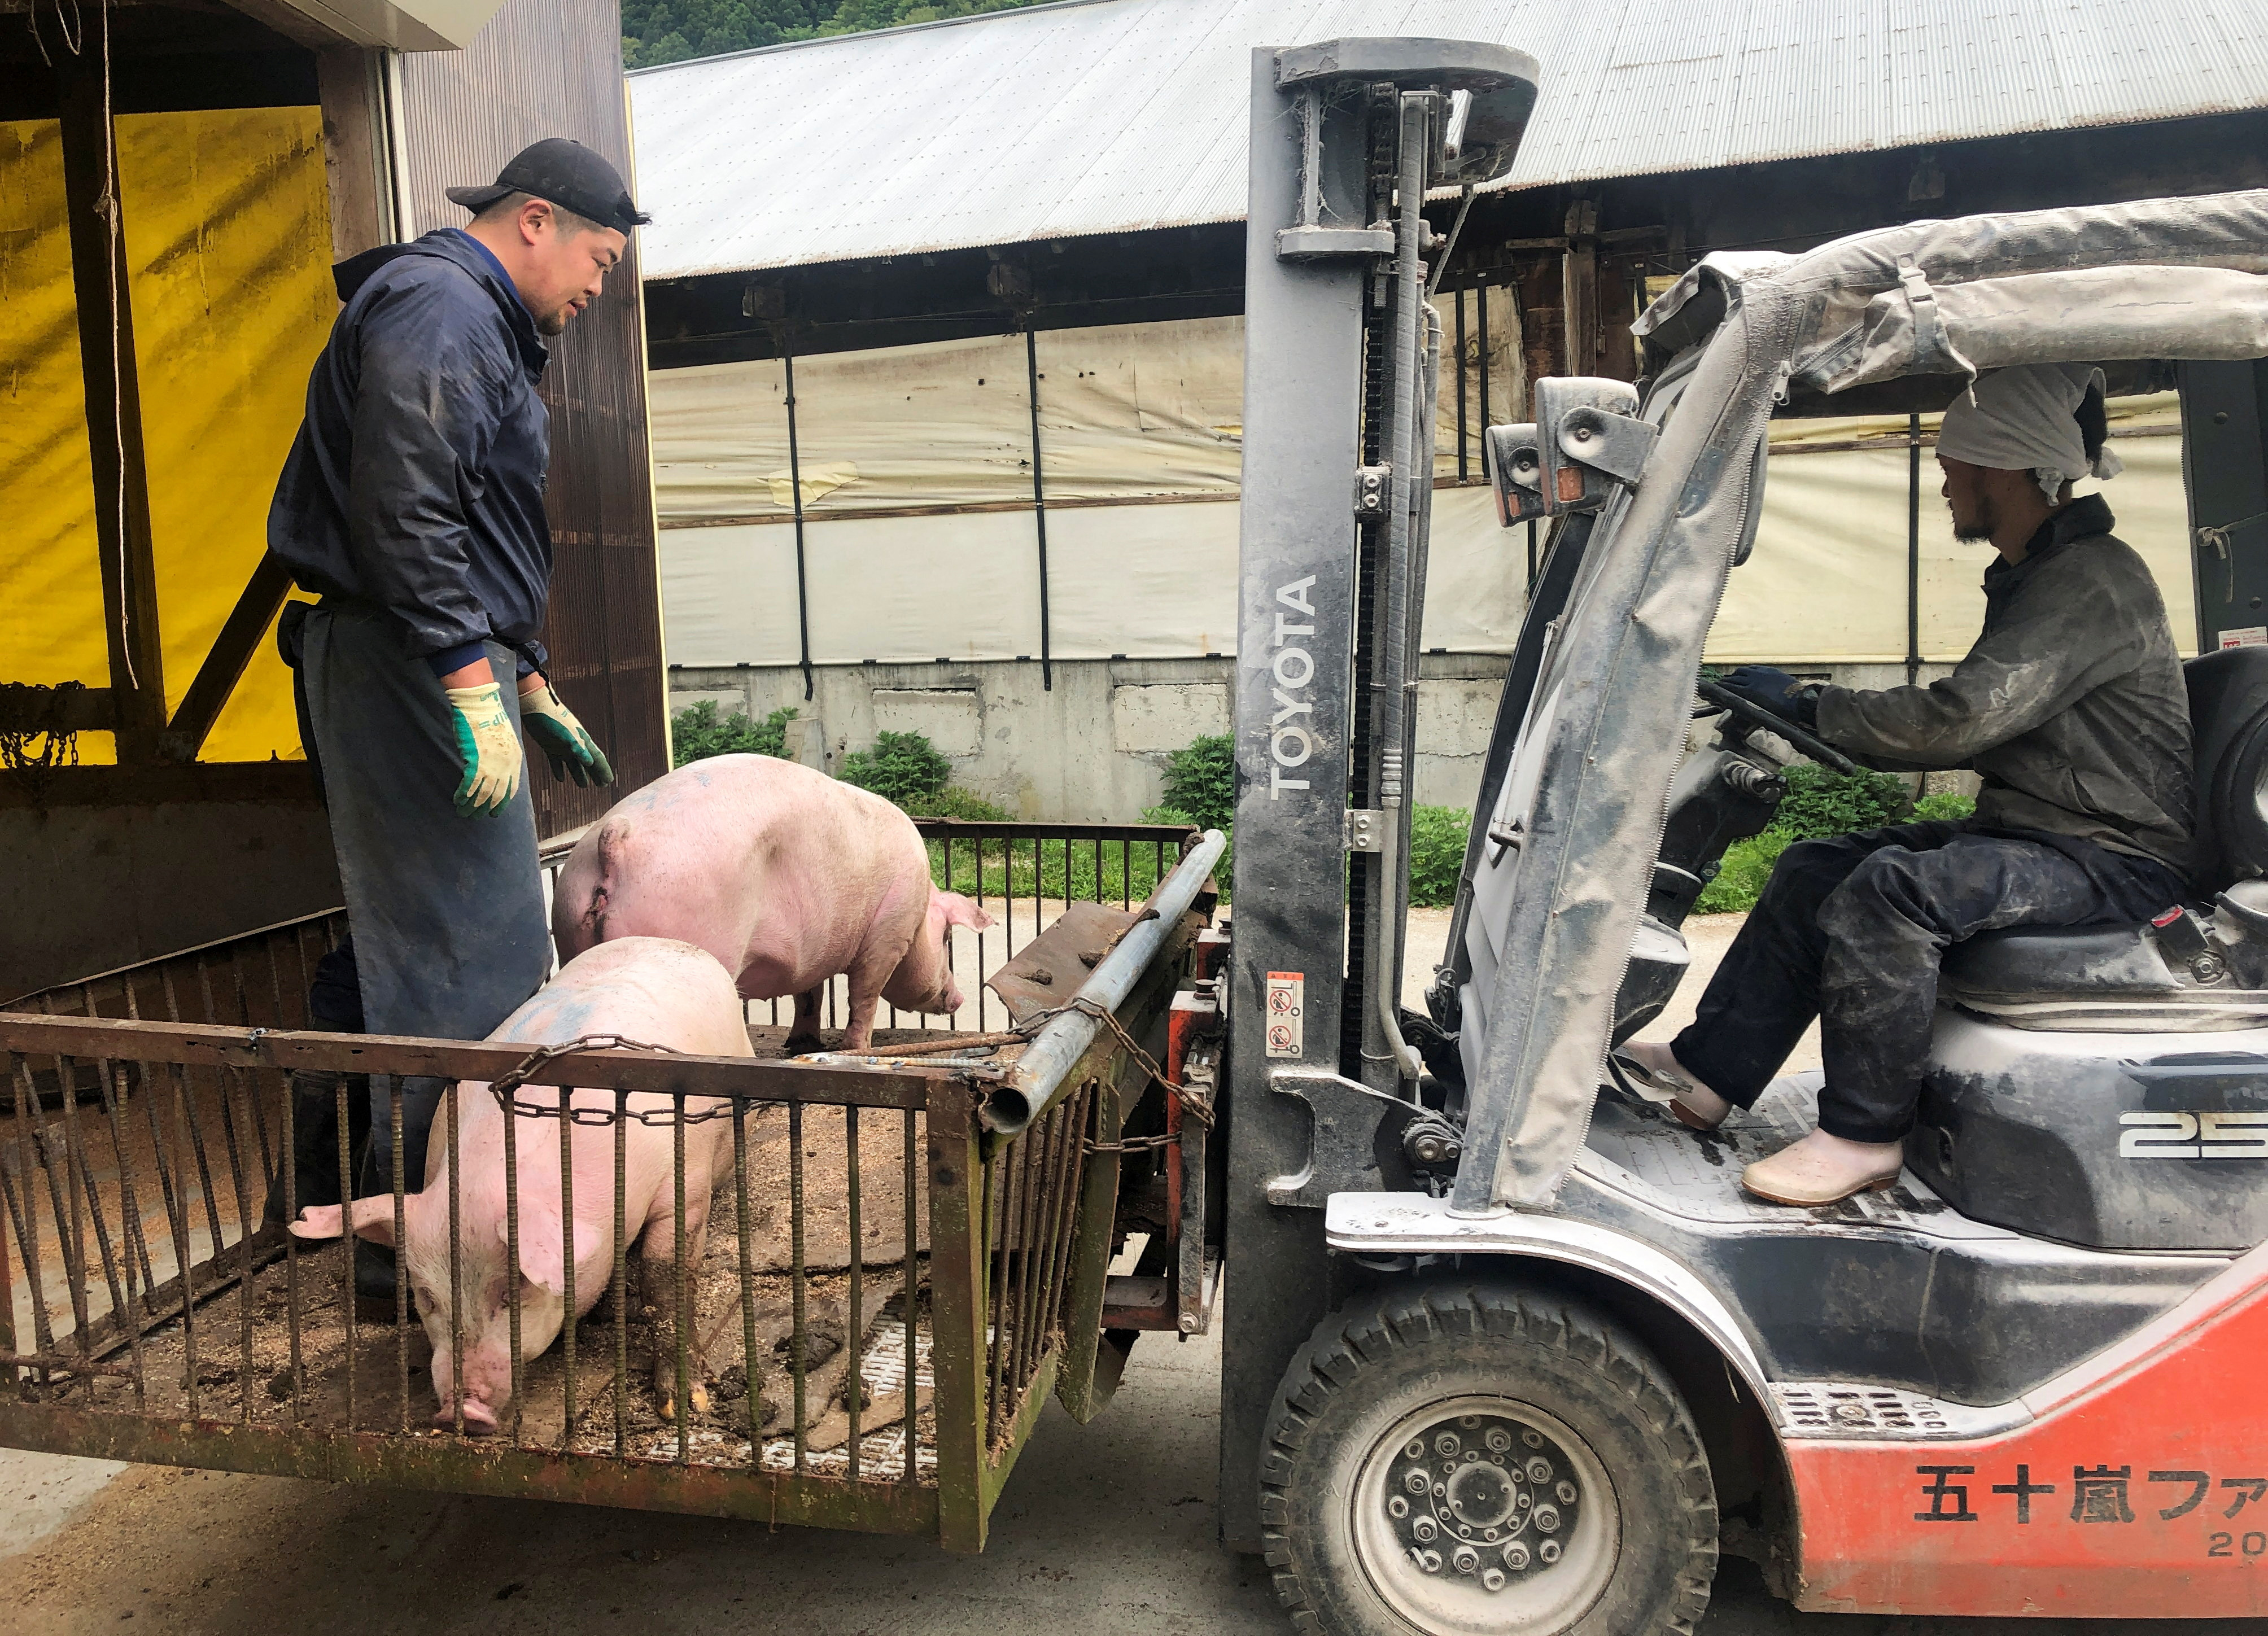 Farmer Kazuharu Igarashi's son tends hogs as they are moved on a forklift to be taken to slaughter, in Tsuruoka